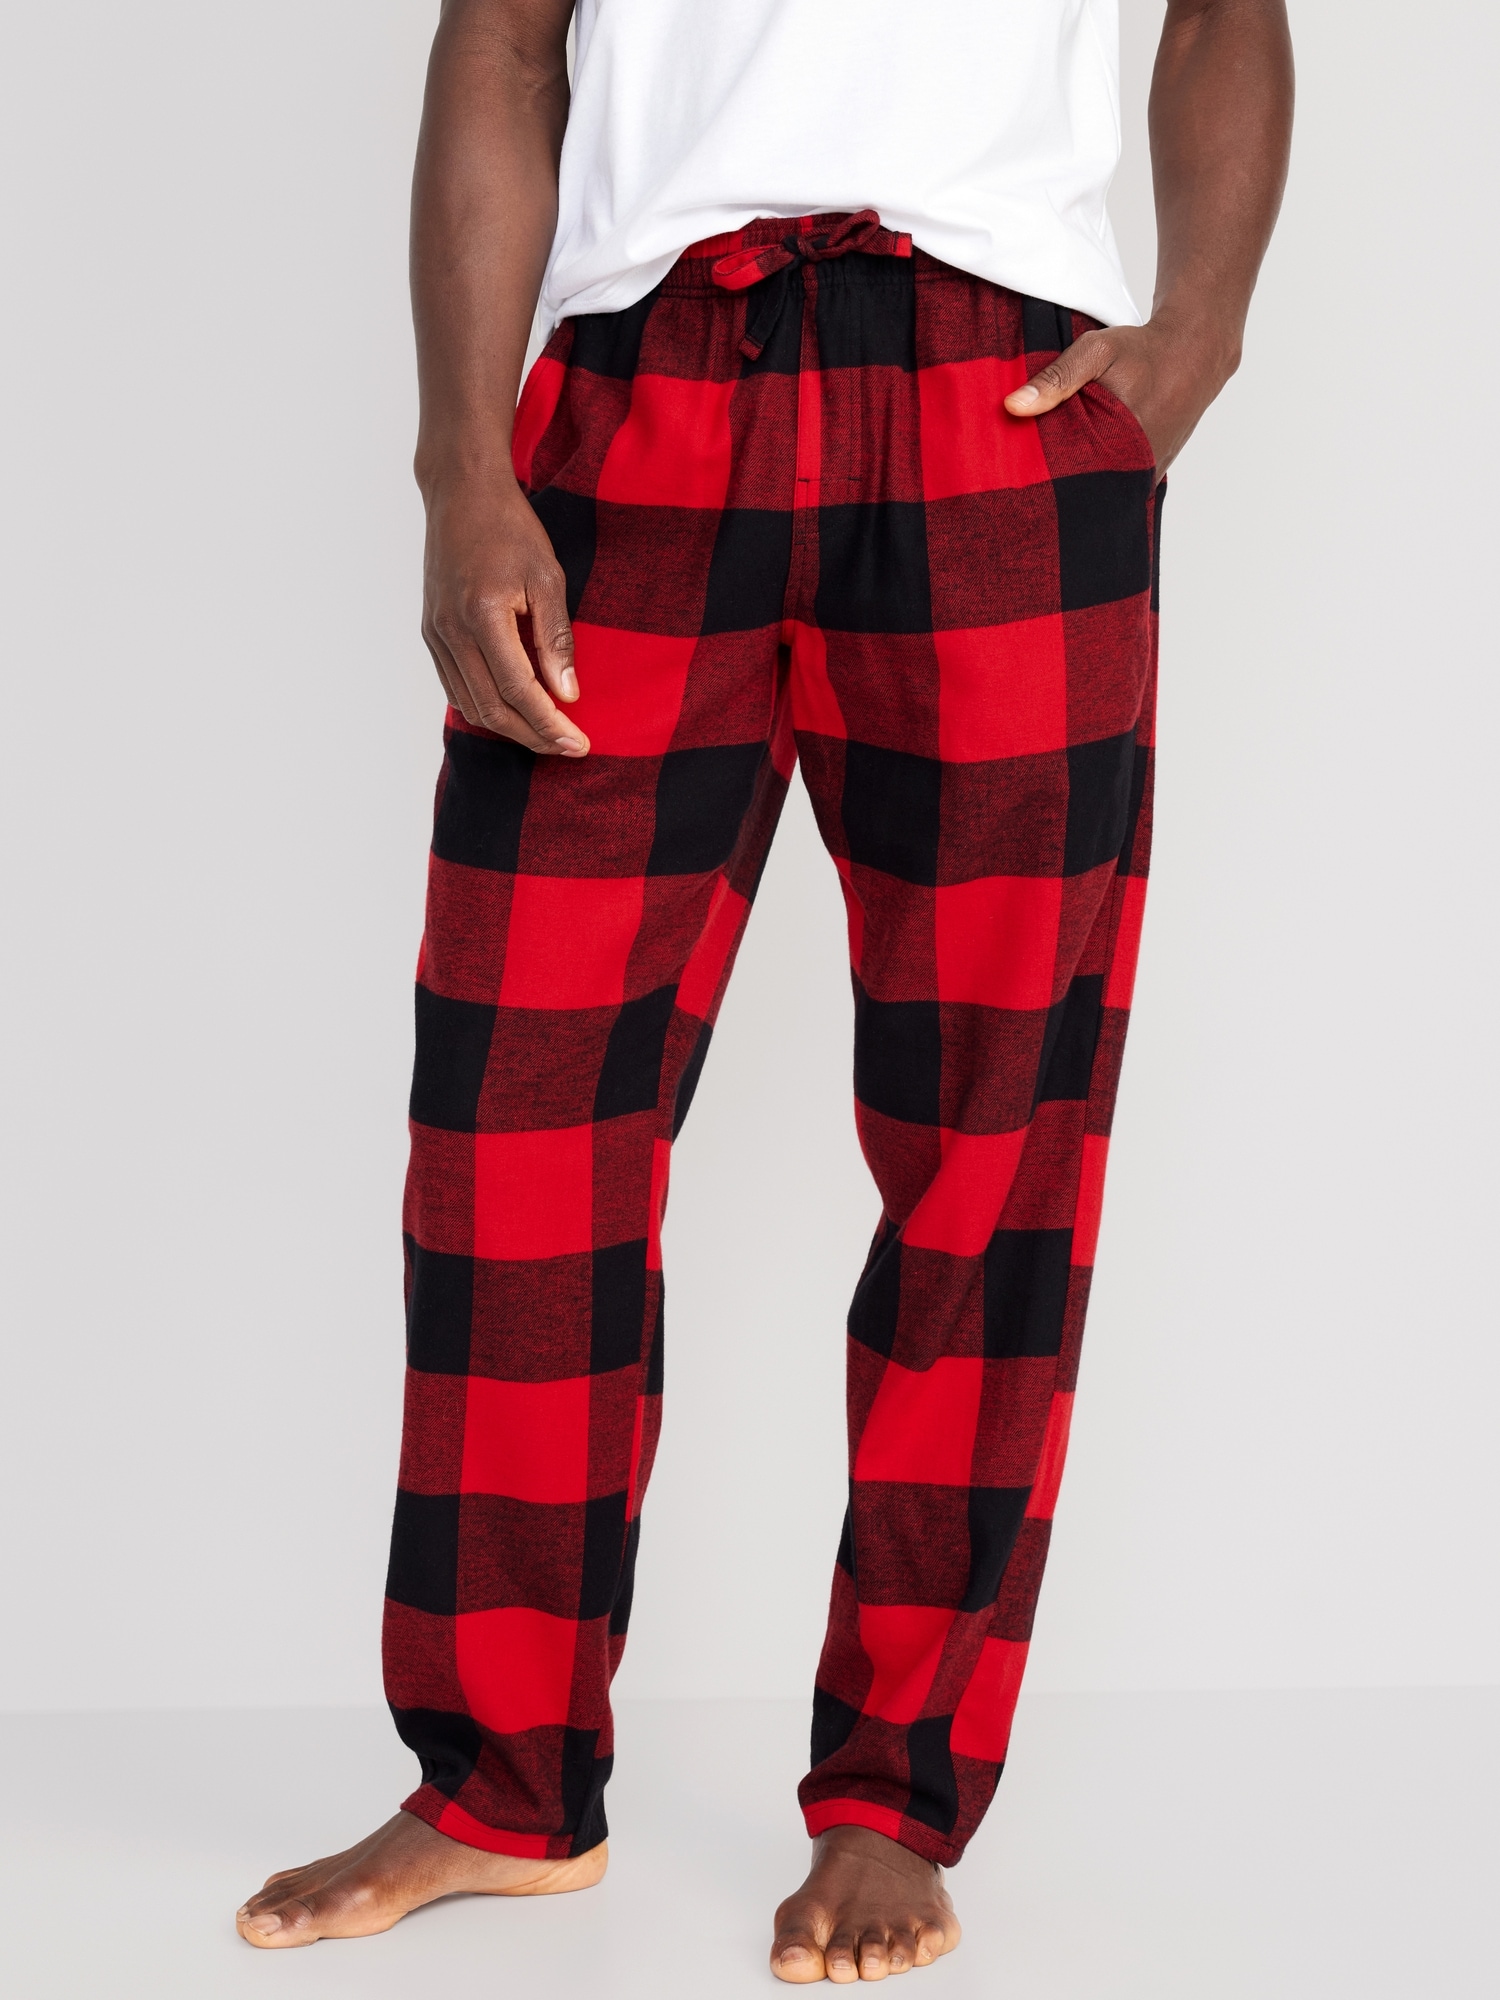 Matching Flannel Pajama Pants | Old Navy